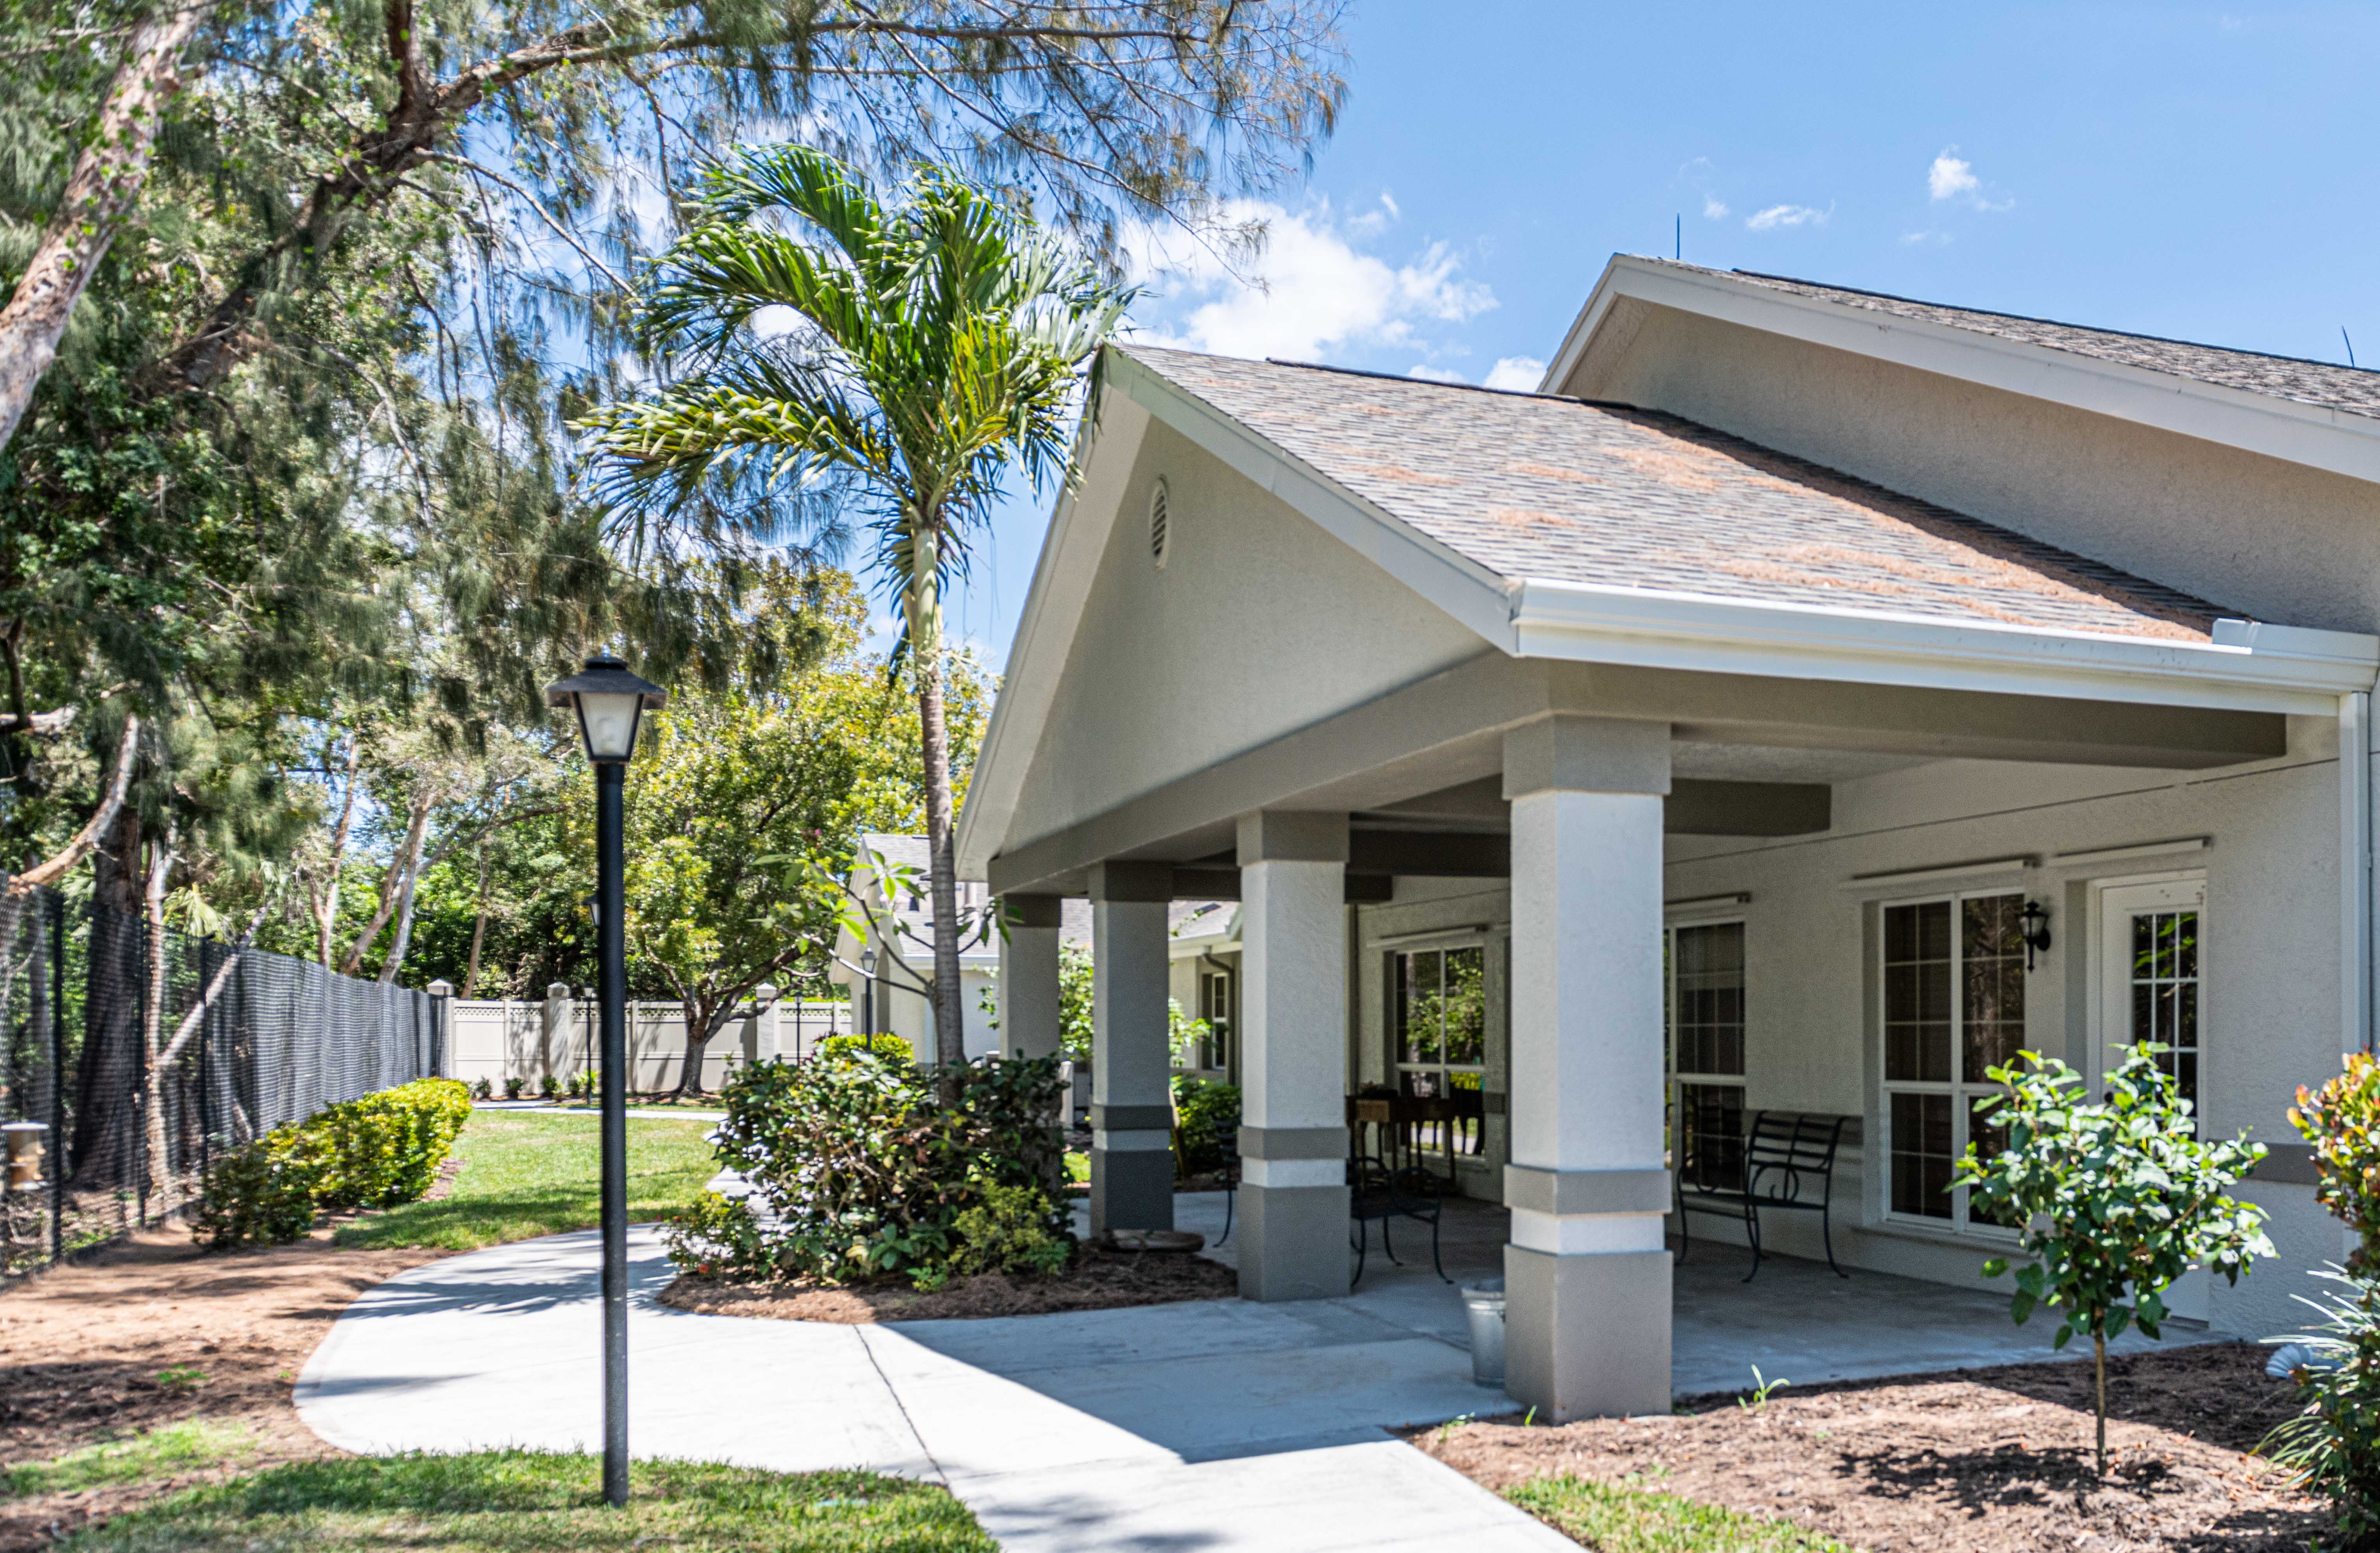 Arden Courts A ProMedica Memory Care Community in Ft. Myers